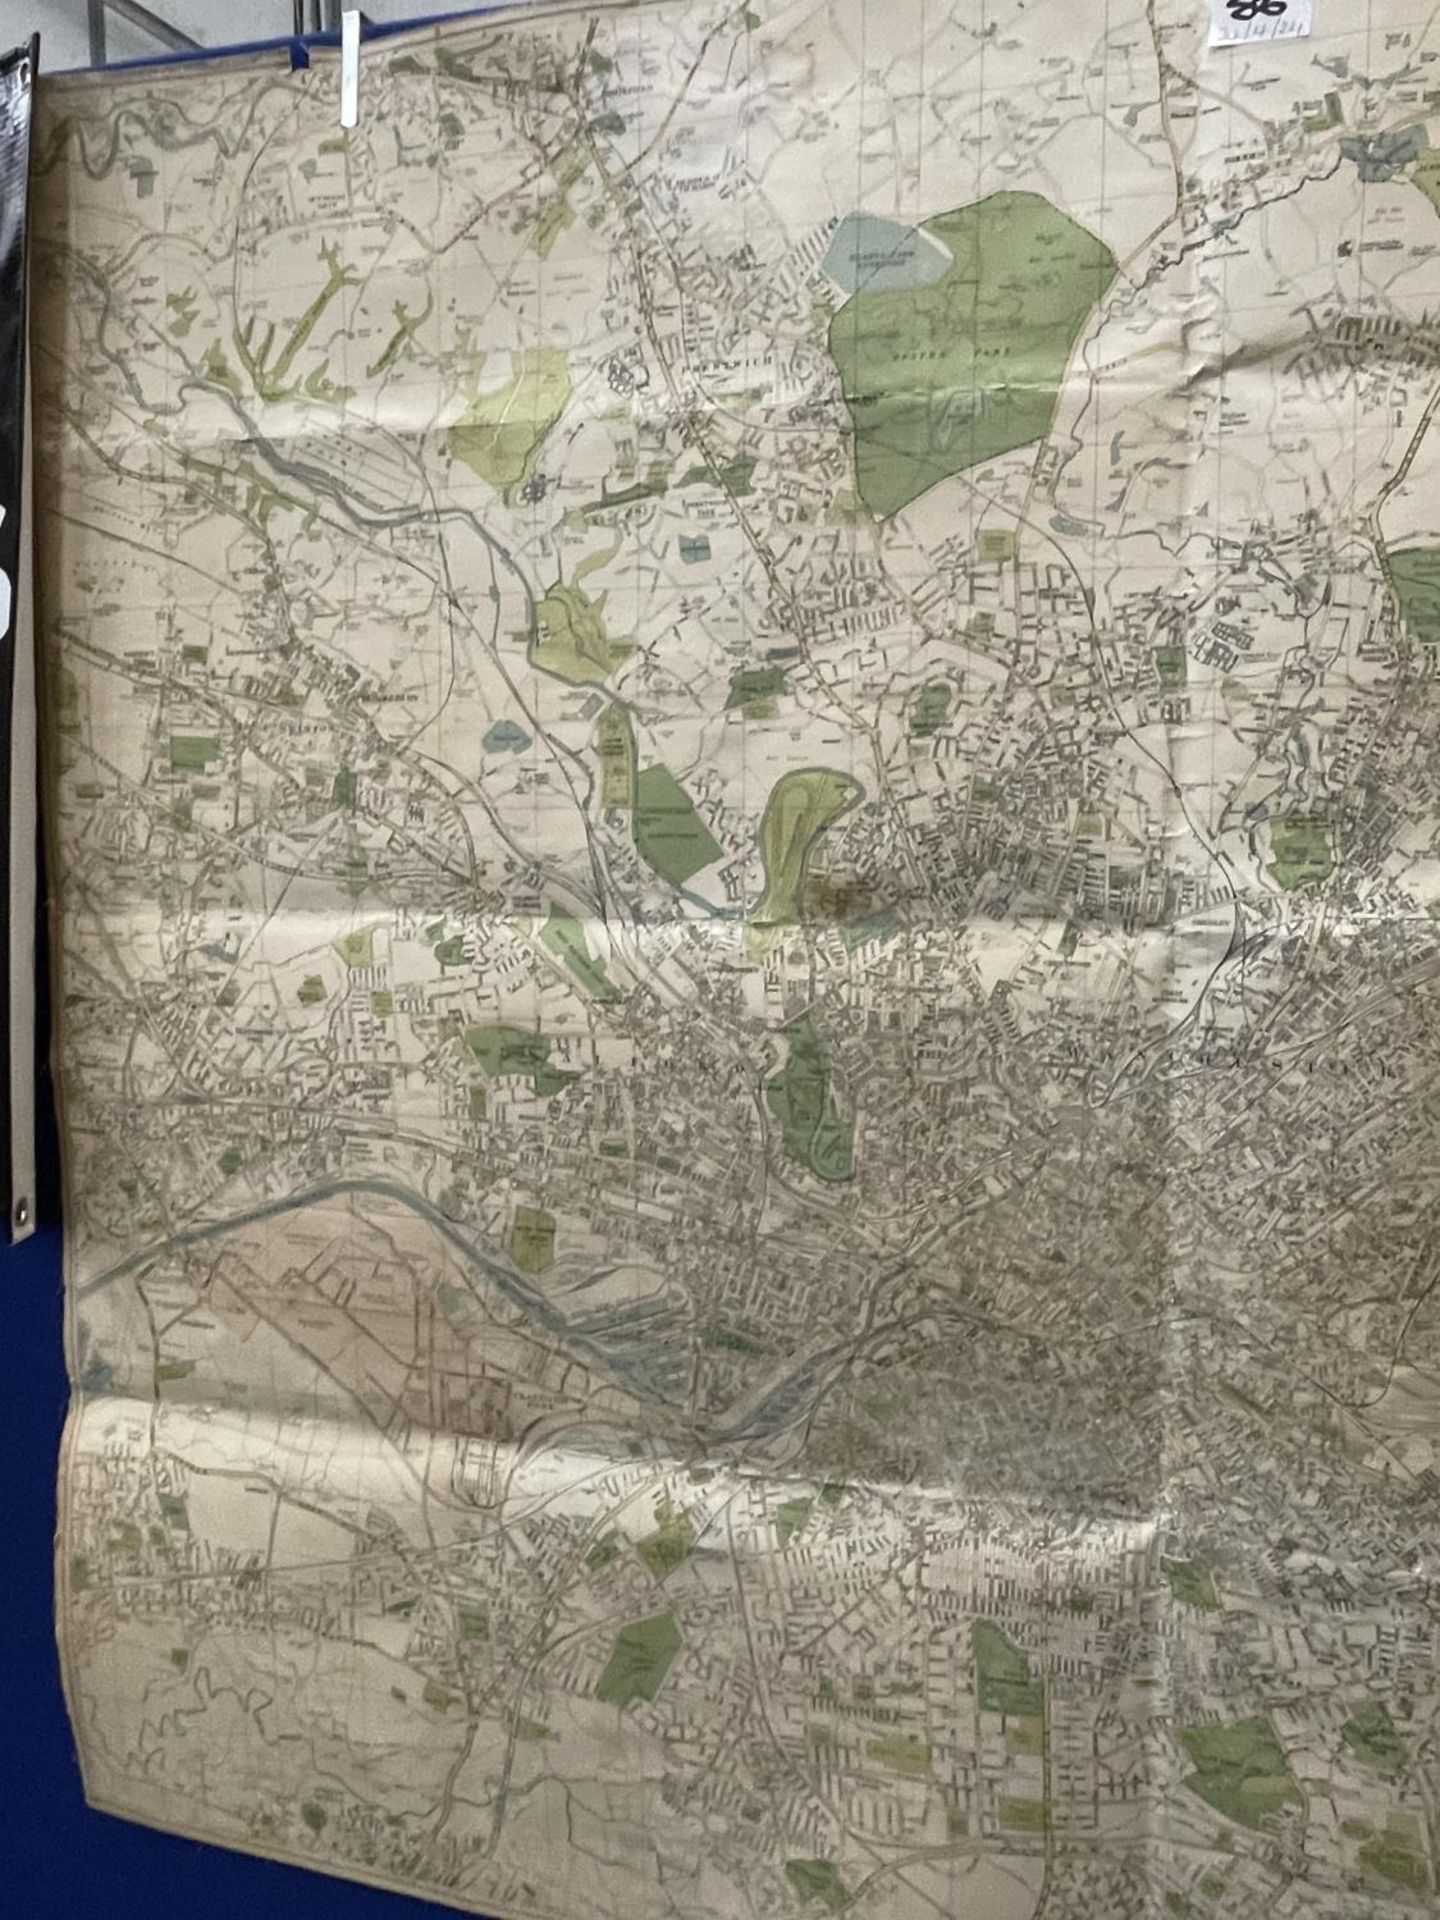 A LARGE VINTAGE MAP OF MANCHESTER AND THE SURROUNDING AREA - Image 3 of 4